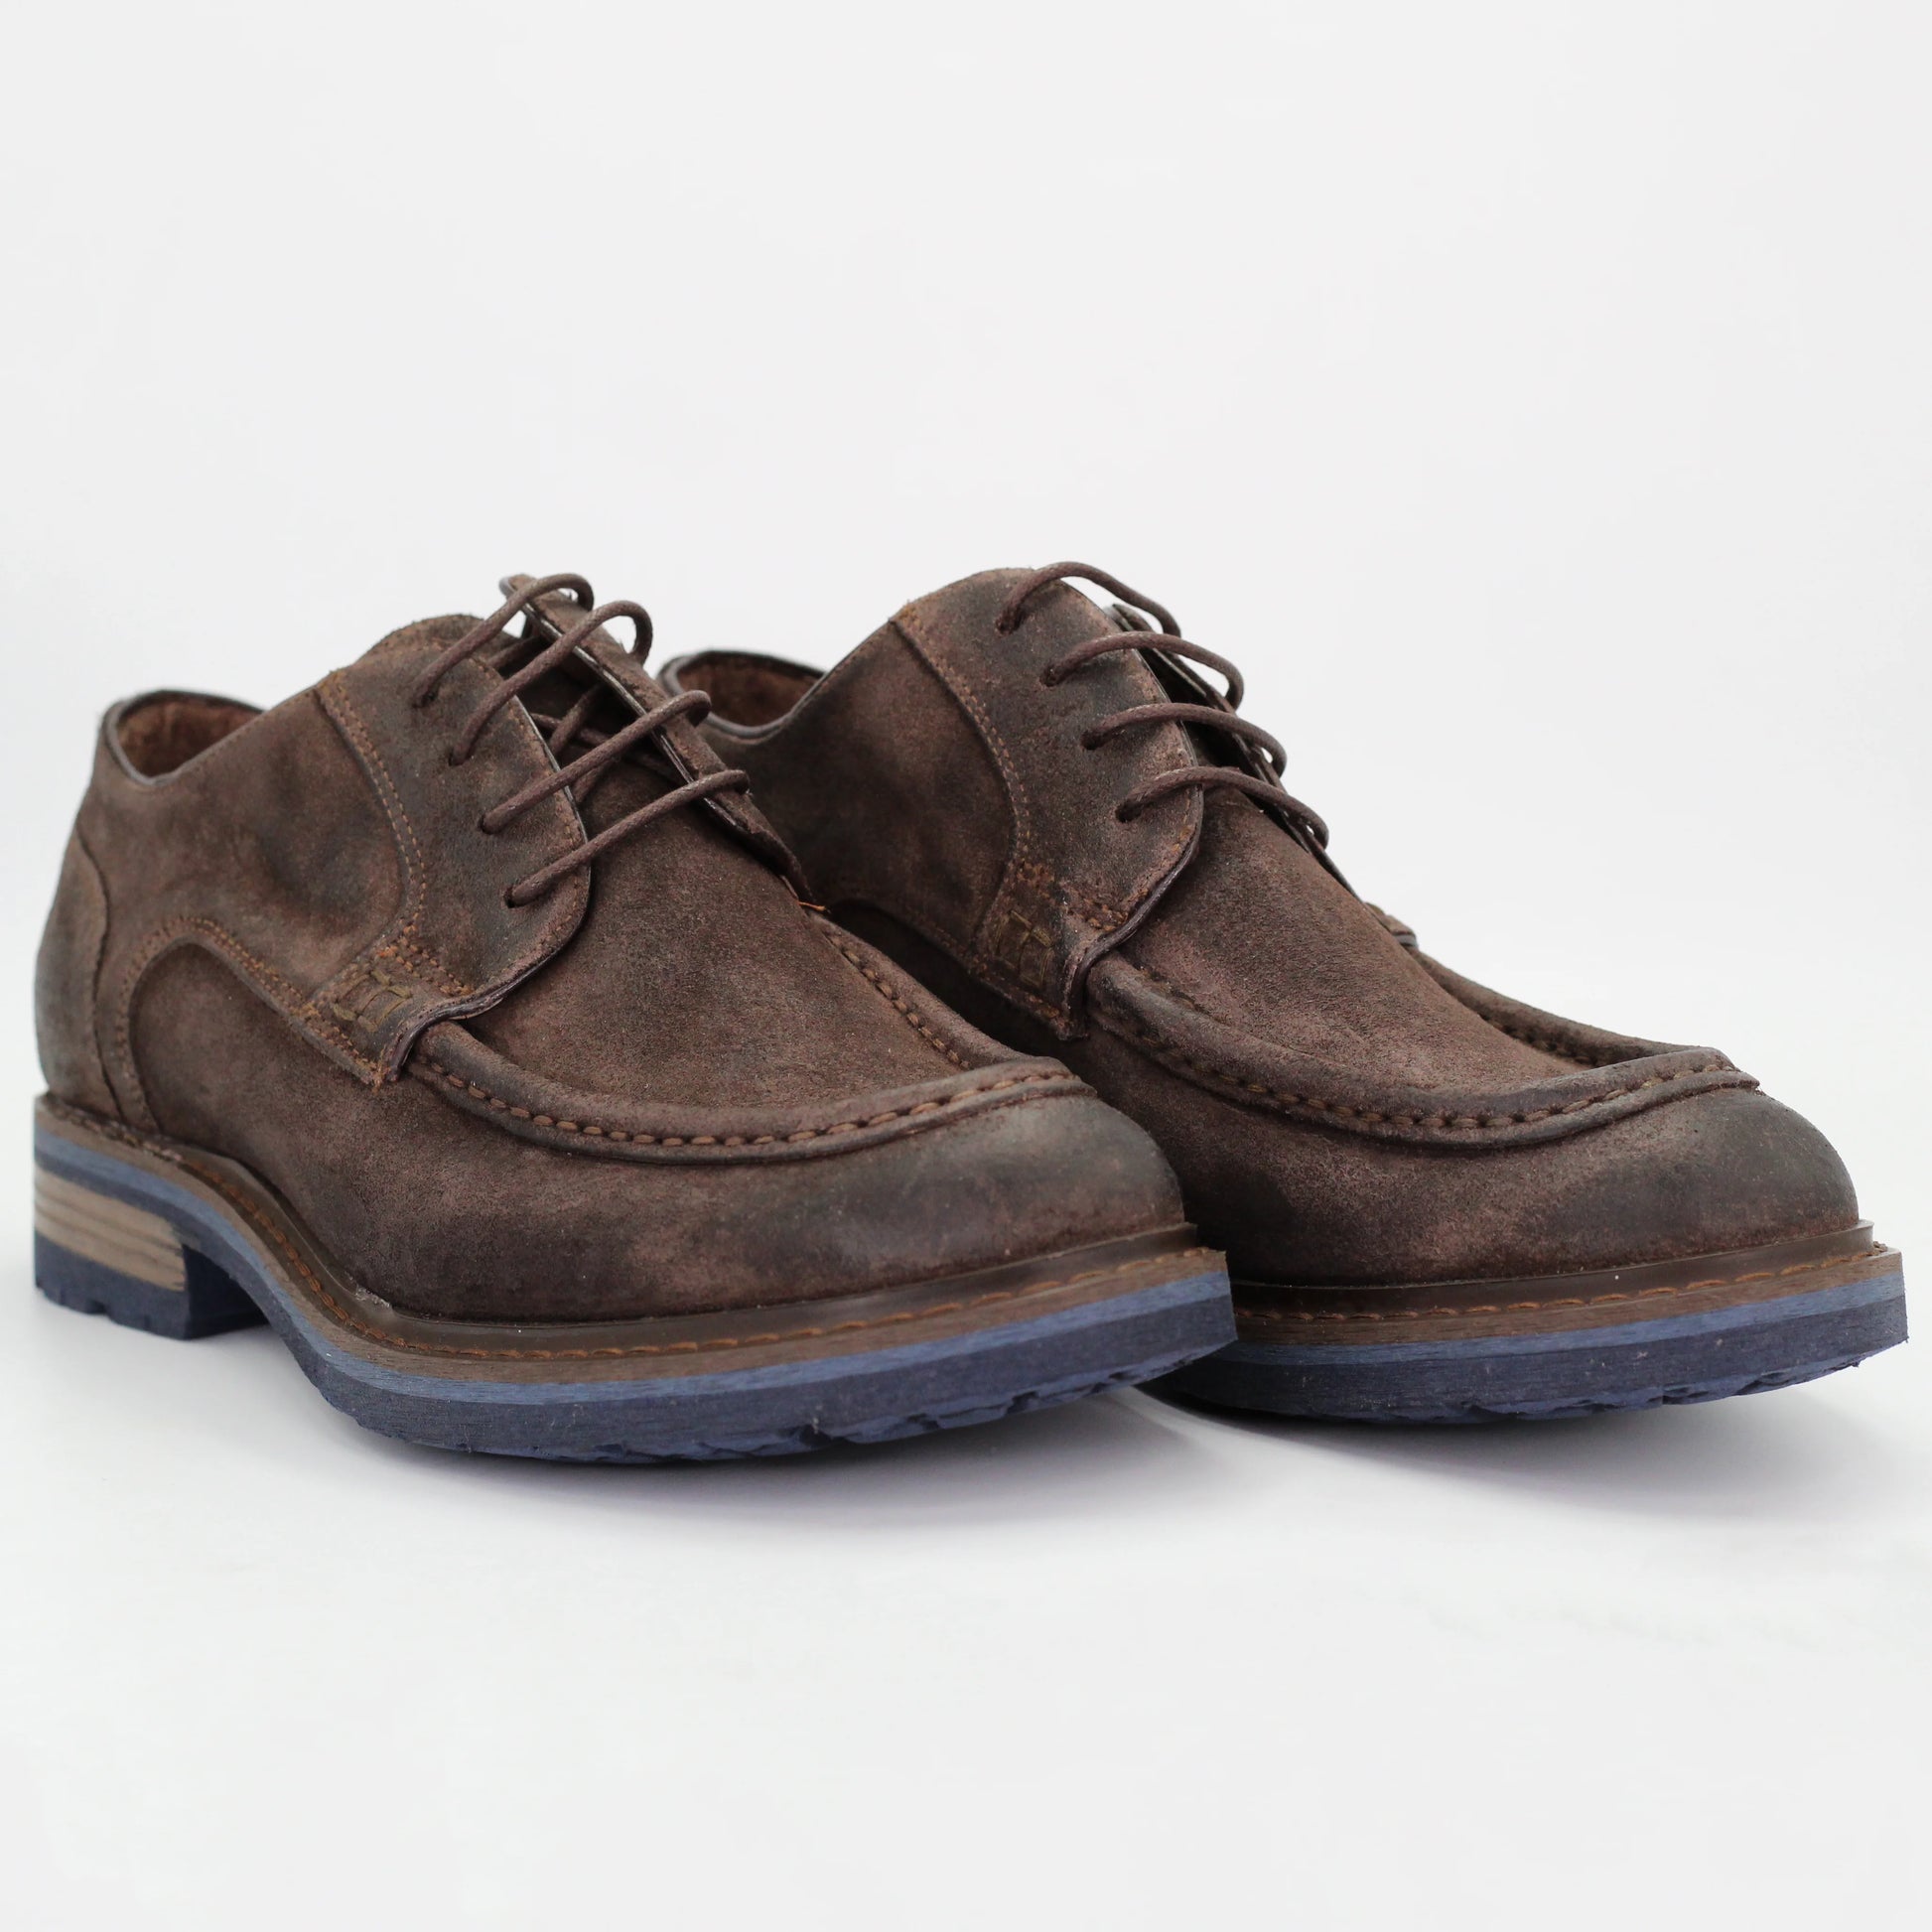 Shop Handmade Italian Leather lace-up derby shoe in espresso (BRU11558) or browse our range of hand-made Italian shoes in leather or suede in-store at Aliverti Cape Town, or shop online. We deliver in South Africa & offer multiple payment plans as well as accept multiple safe & secure payment methods.